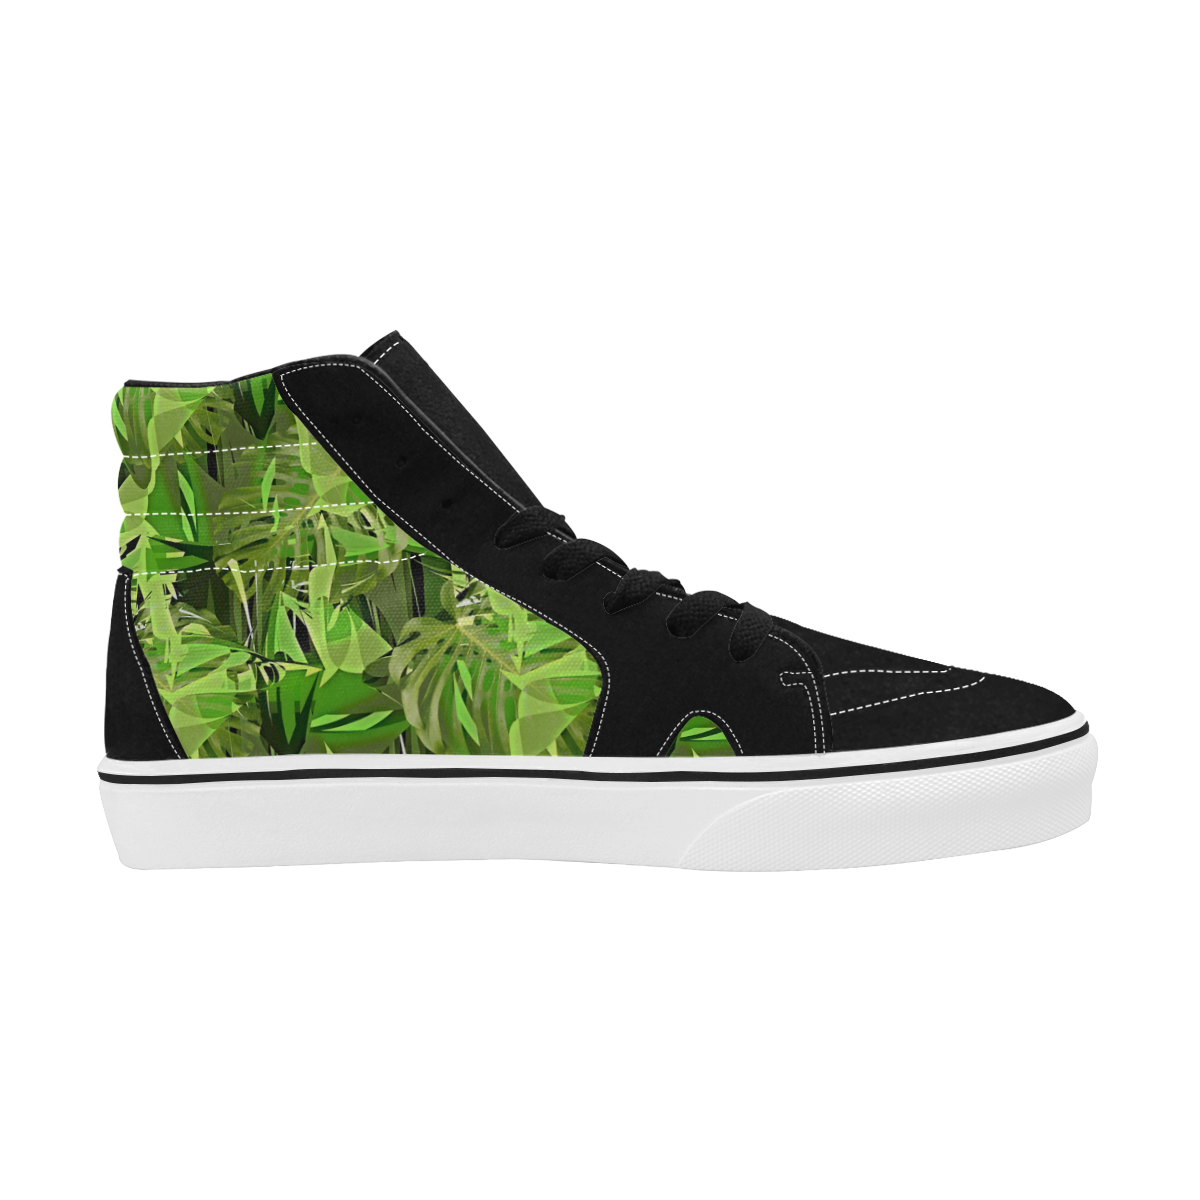 Tropical Jungle Leaves Camouflage Women's High Top Skateboarding Shoes/Large (Model E001-1)